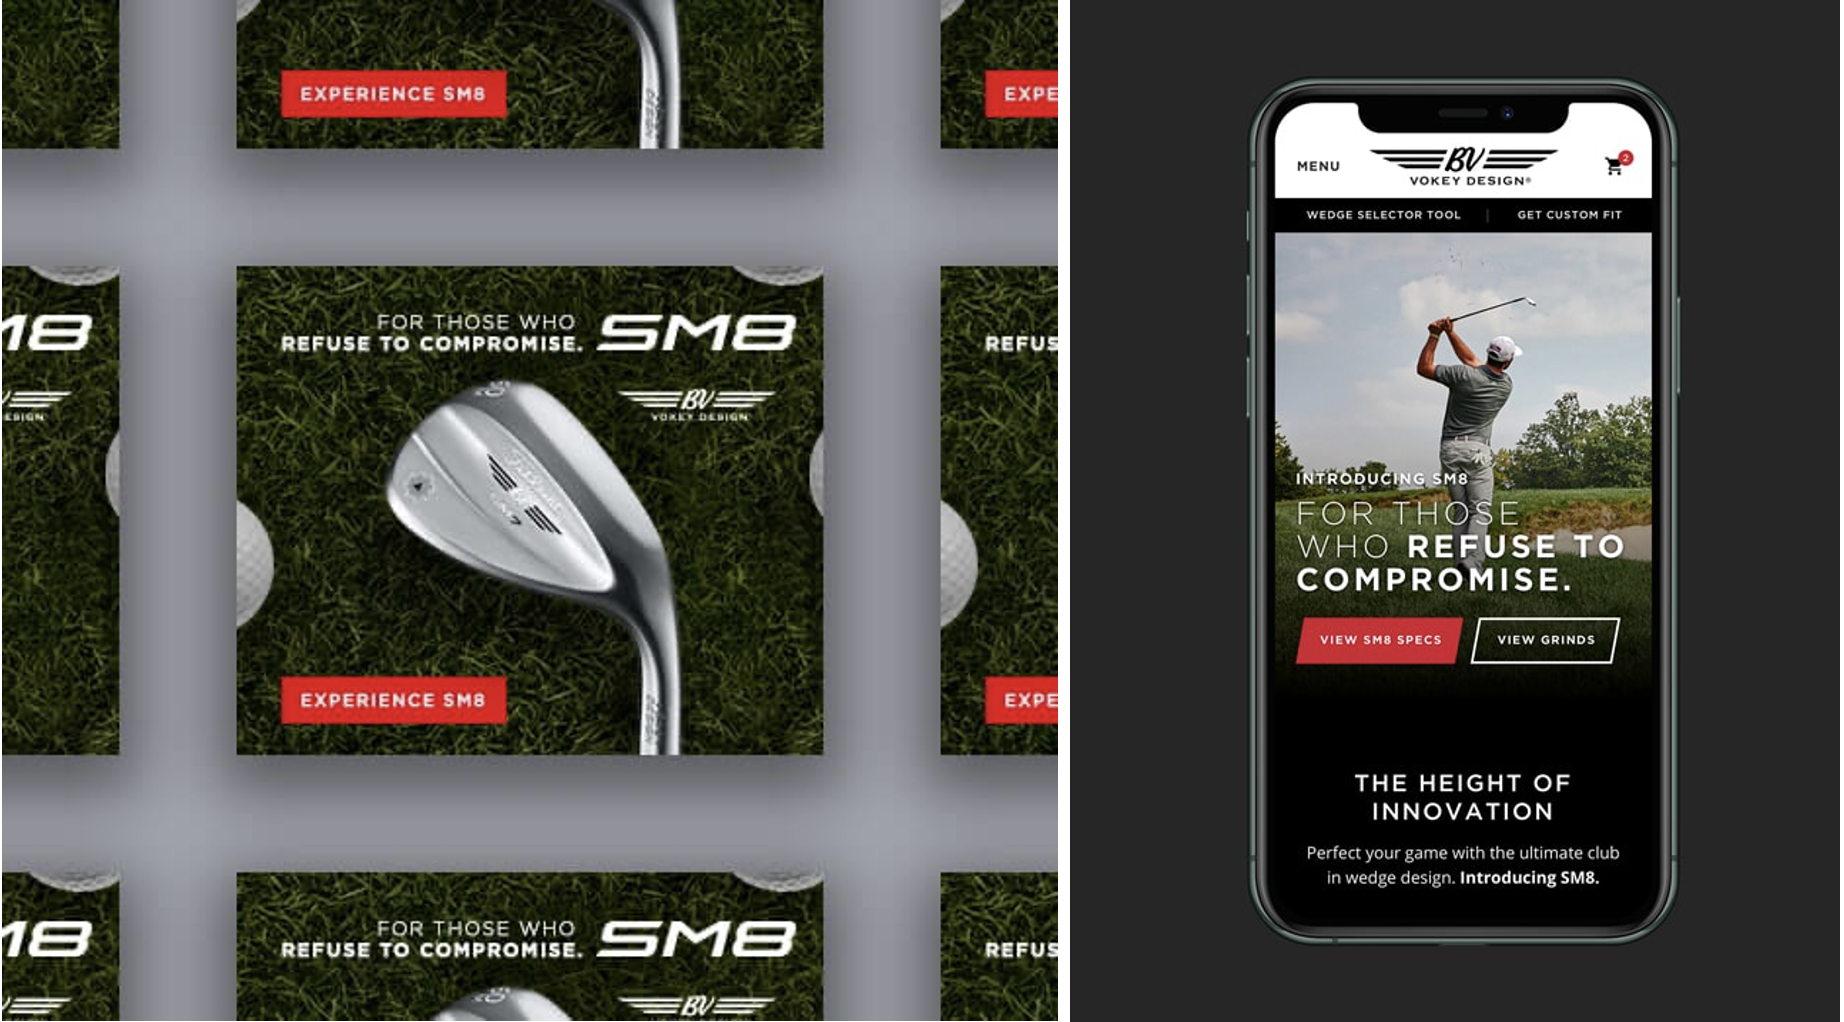 Red Door Interactive Creative for Vokey Wedges, Informed by Resonate Data